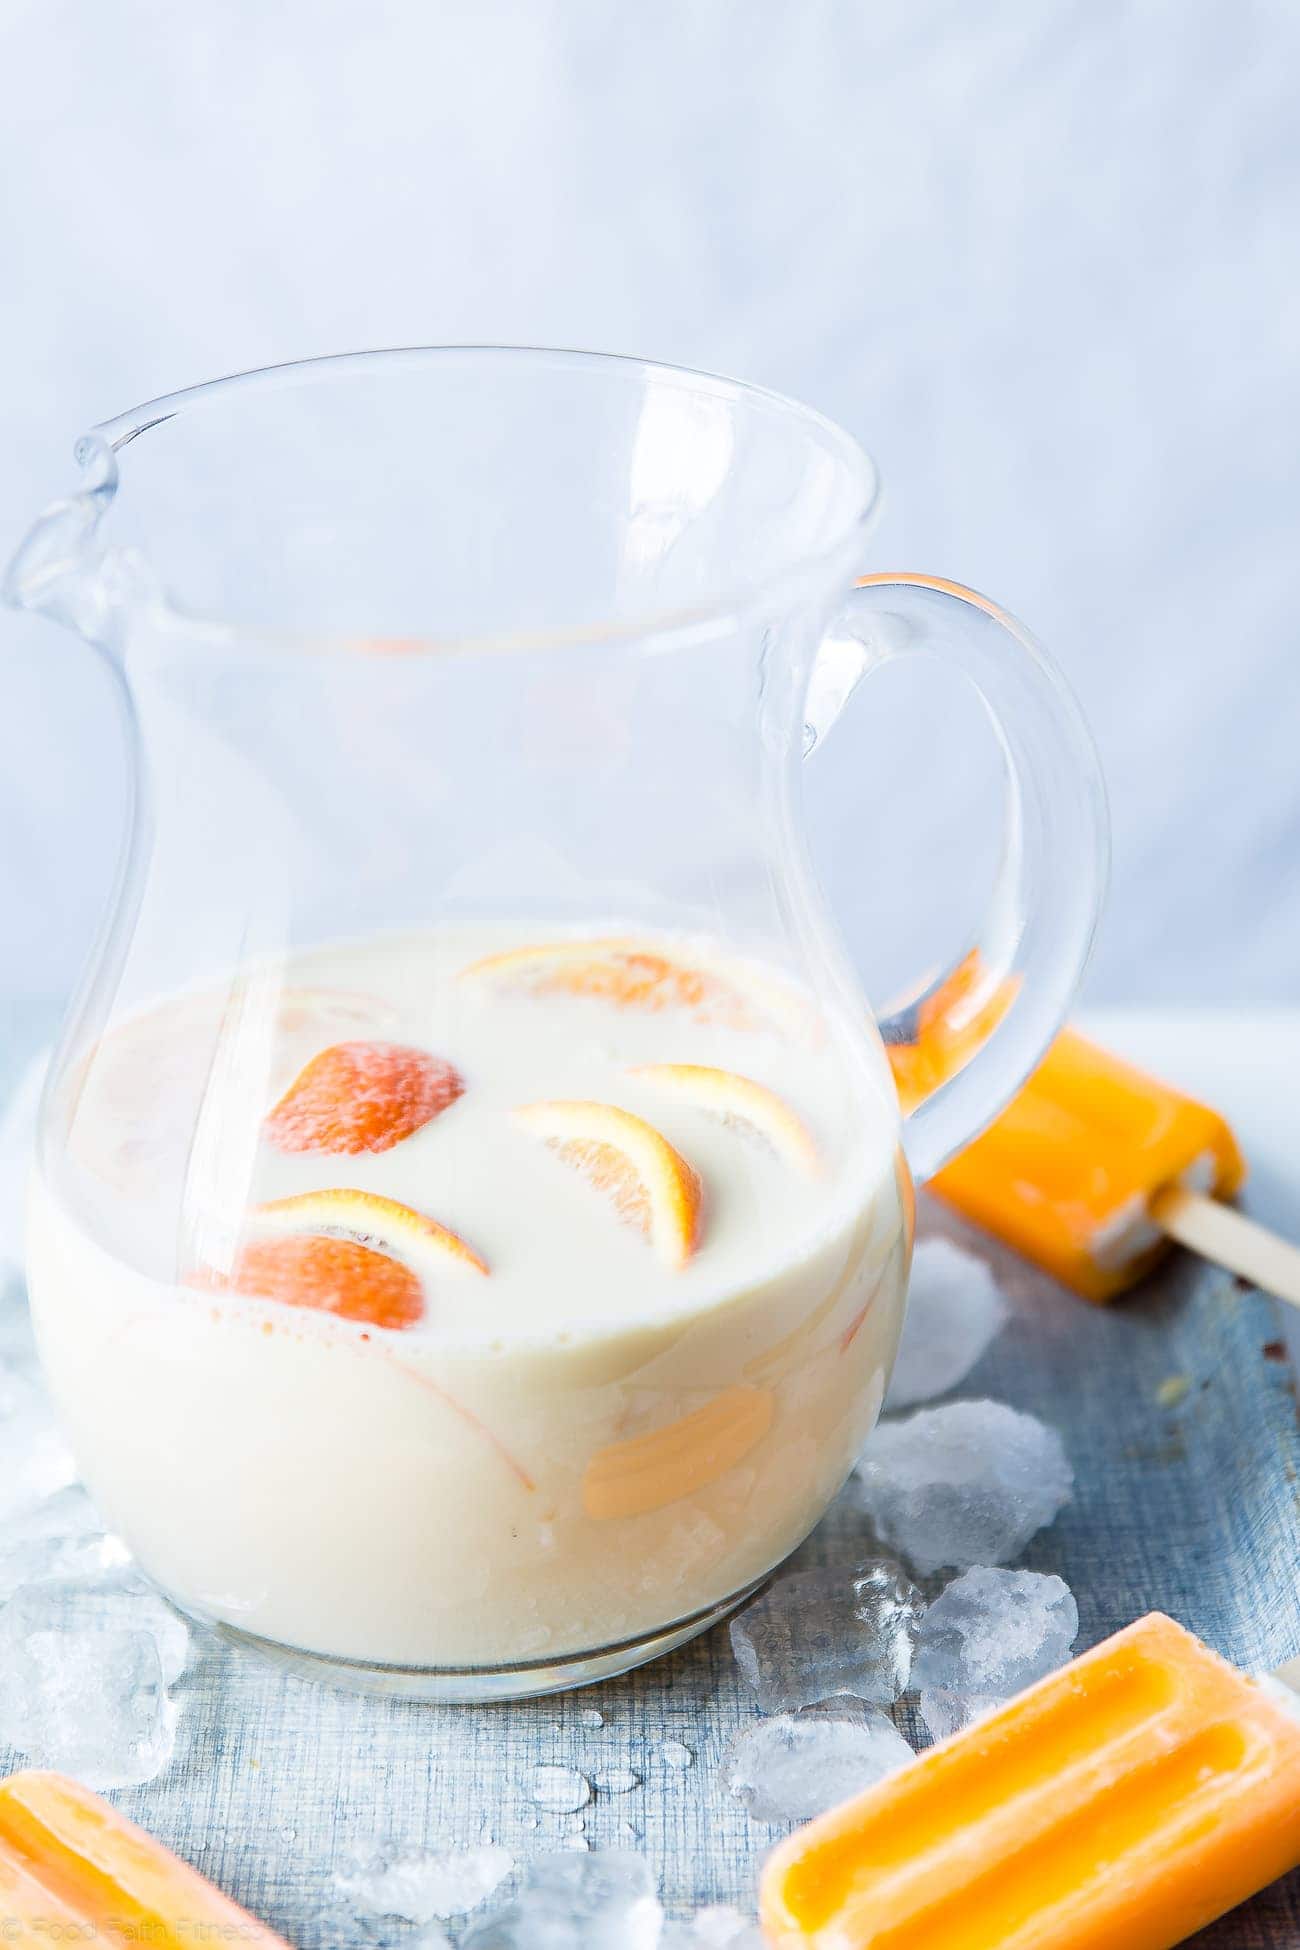 Creamsicle Cashew Milk - This quick and easy, 4 ingredient cashew milk recipe tastes like a creamsicle! It's a paleo, vegan and whole30 compliant drink that tastes better than store bought! | Foodfaithfitness.com | @FoodFaithFit